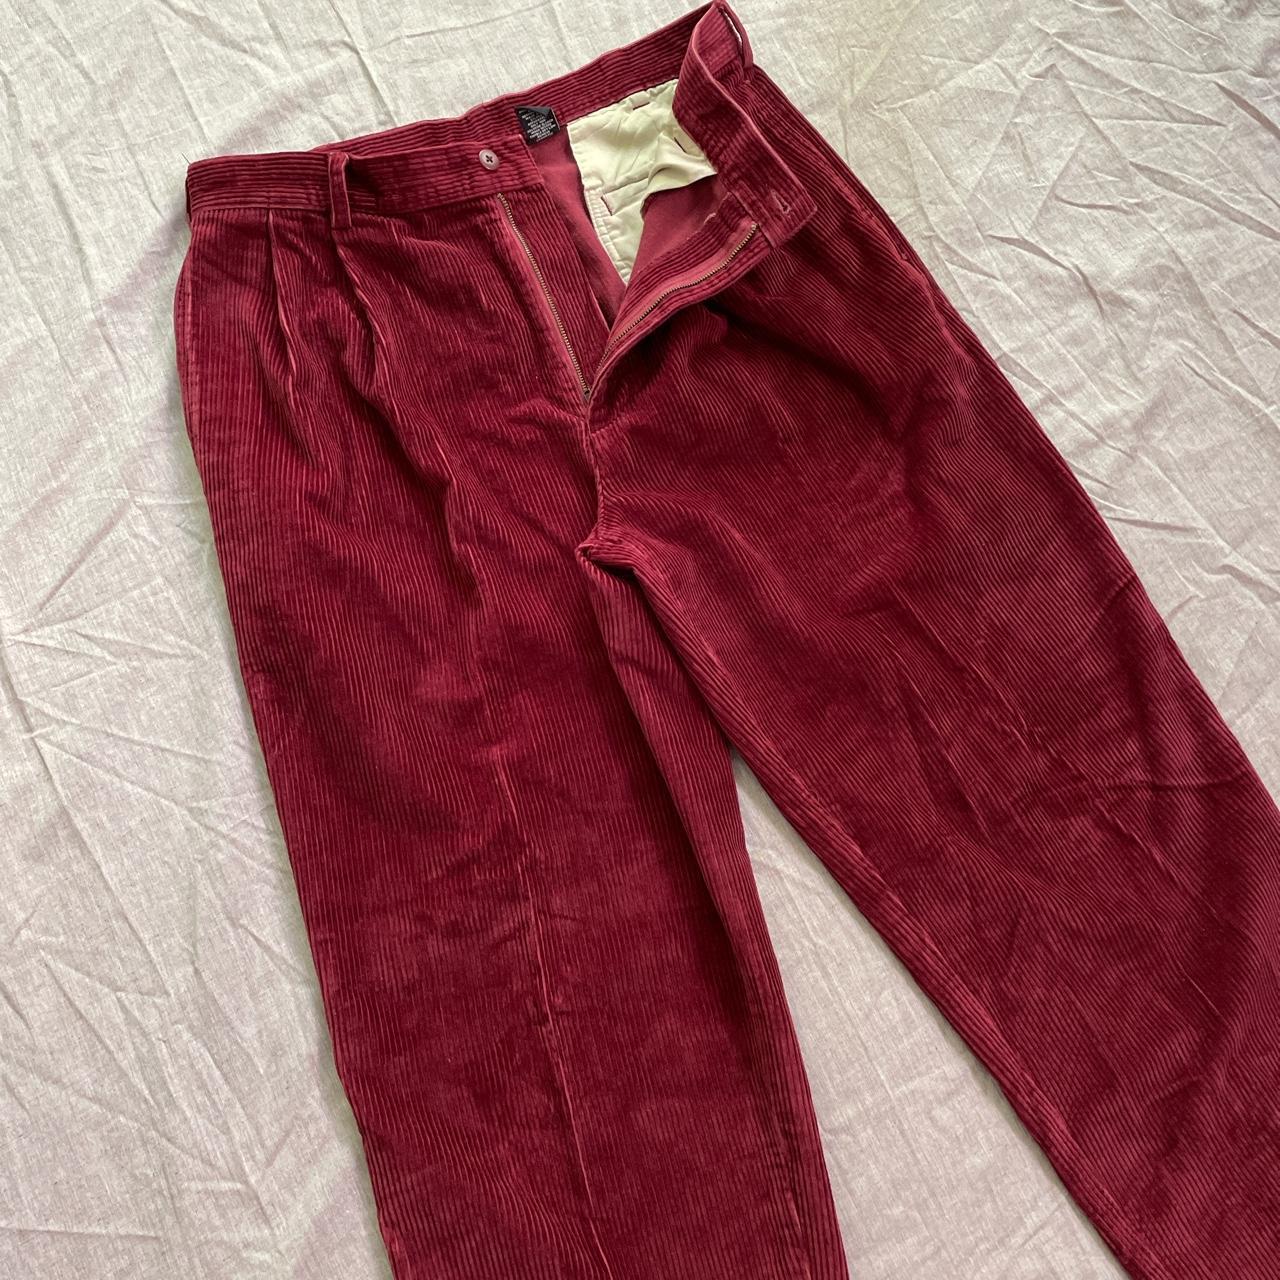 Jos. A. Bank Men's Burgundy and Red Trousers | Depop